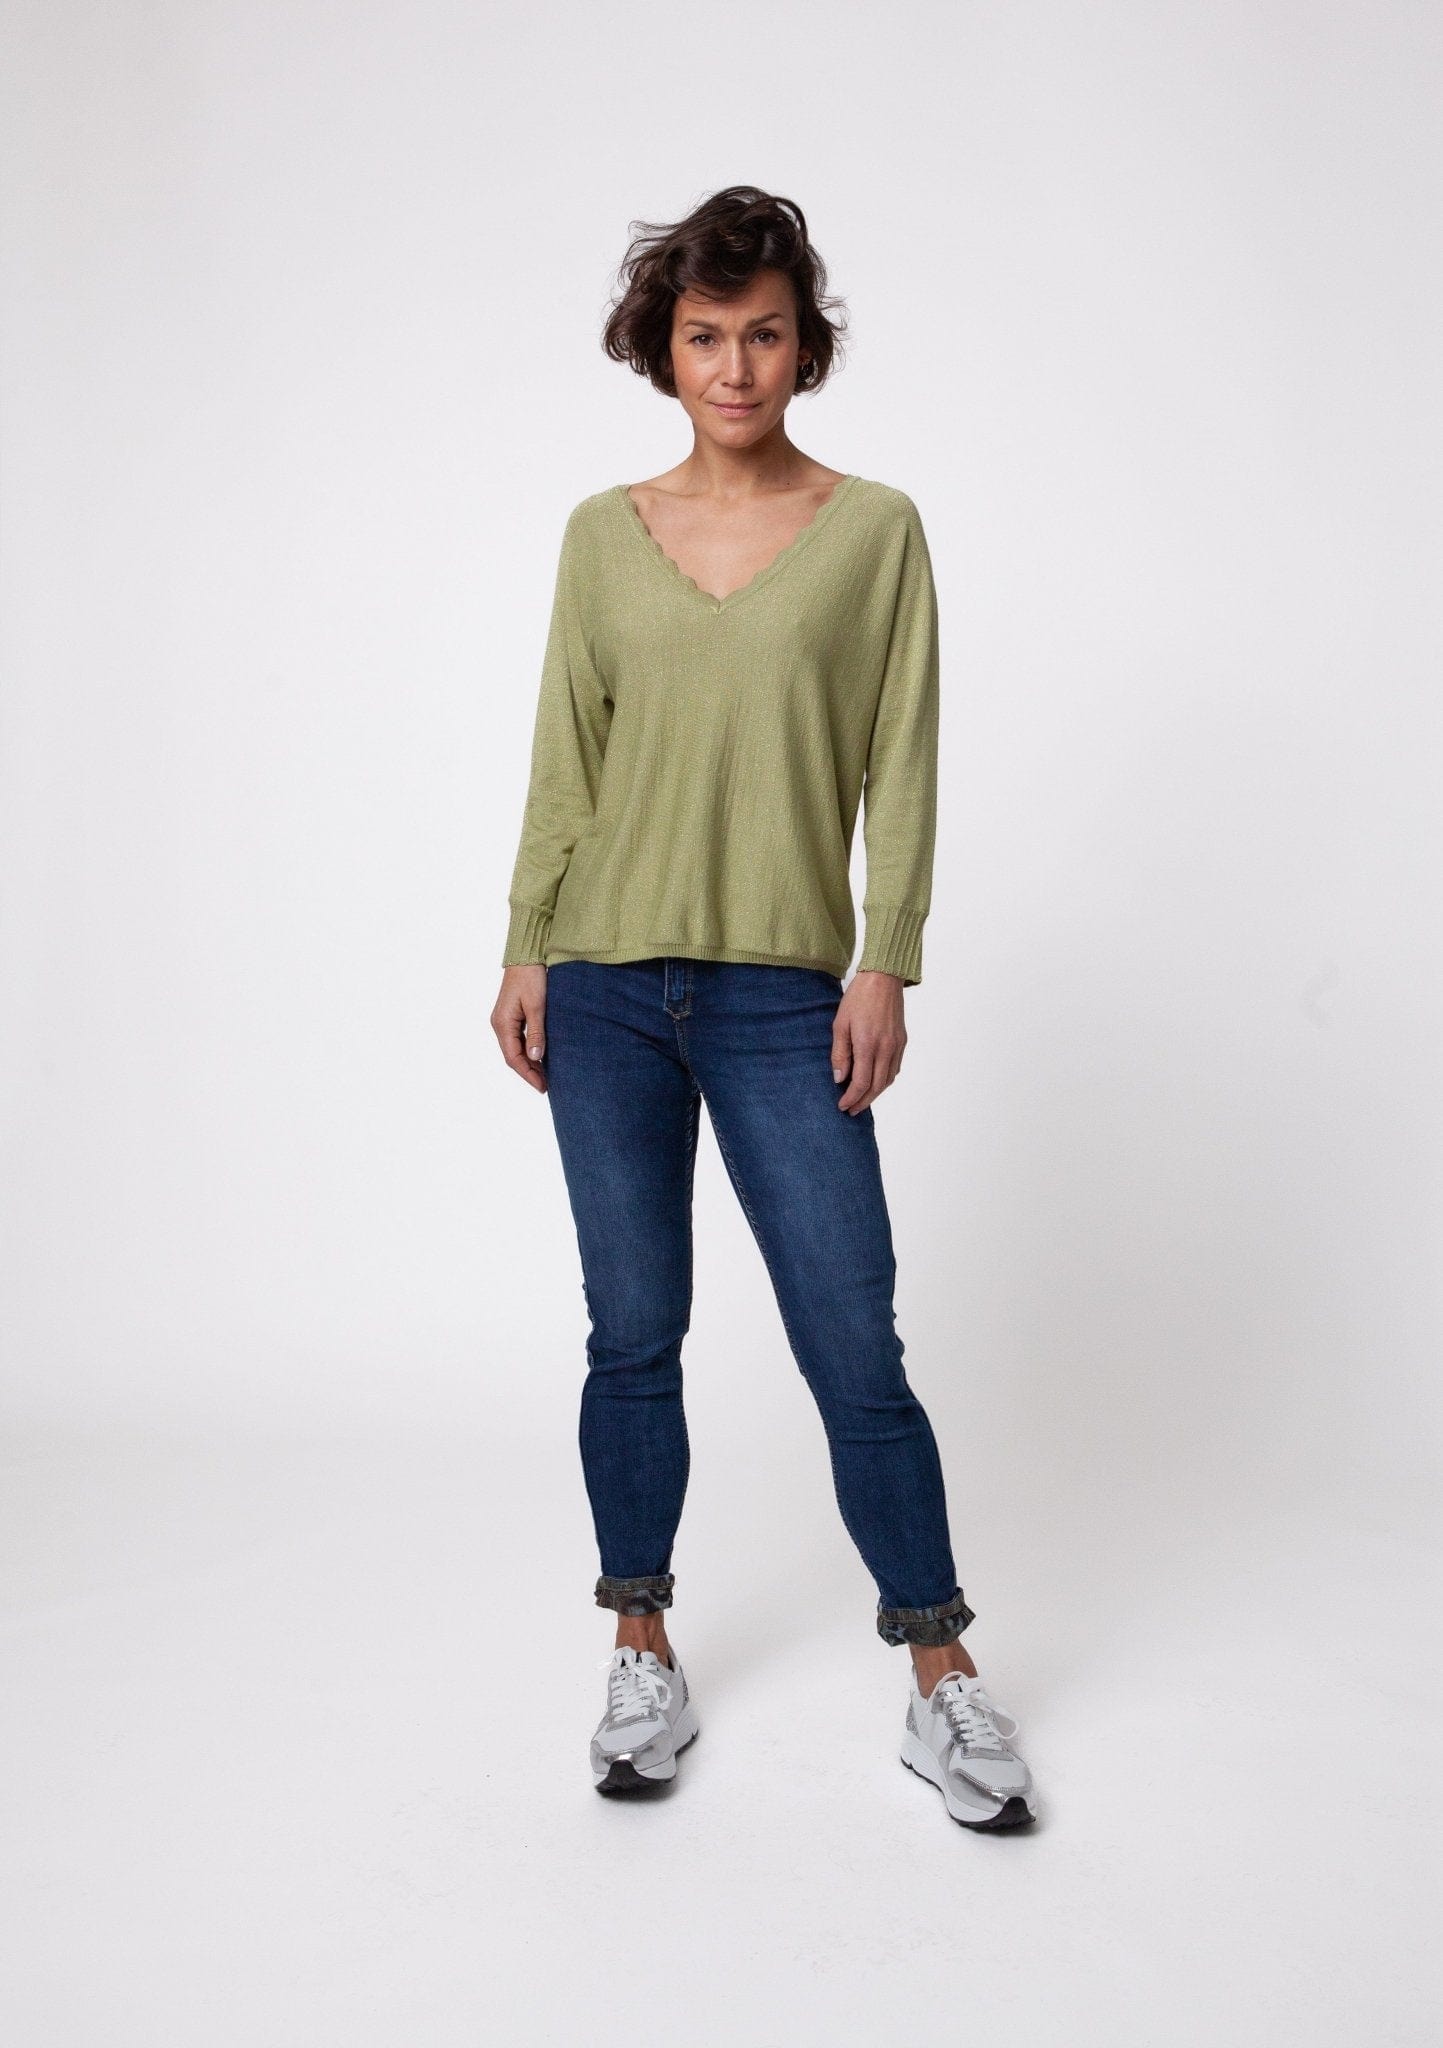 V Neck Lurex Knit with Scalloped Edge in Olive - Tribute StoreTRIBUTE